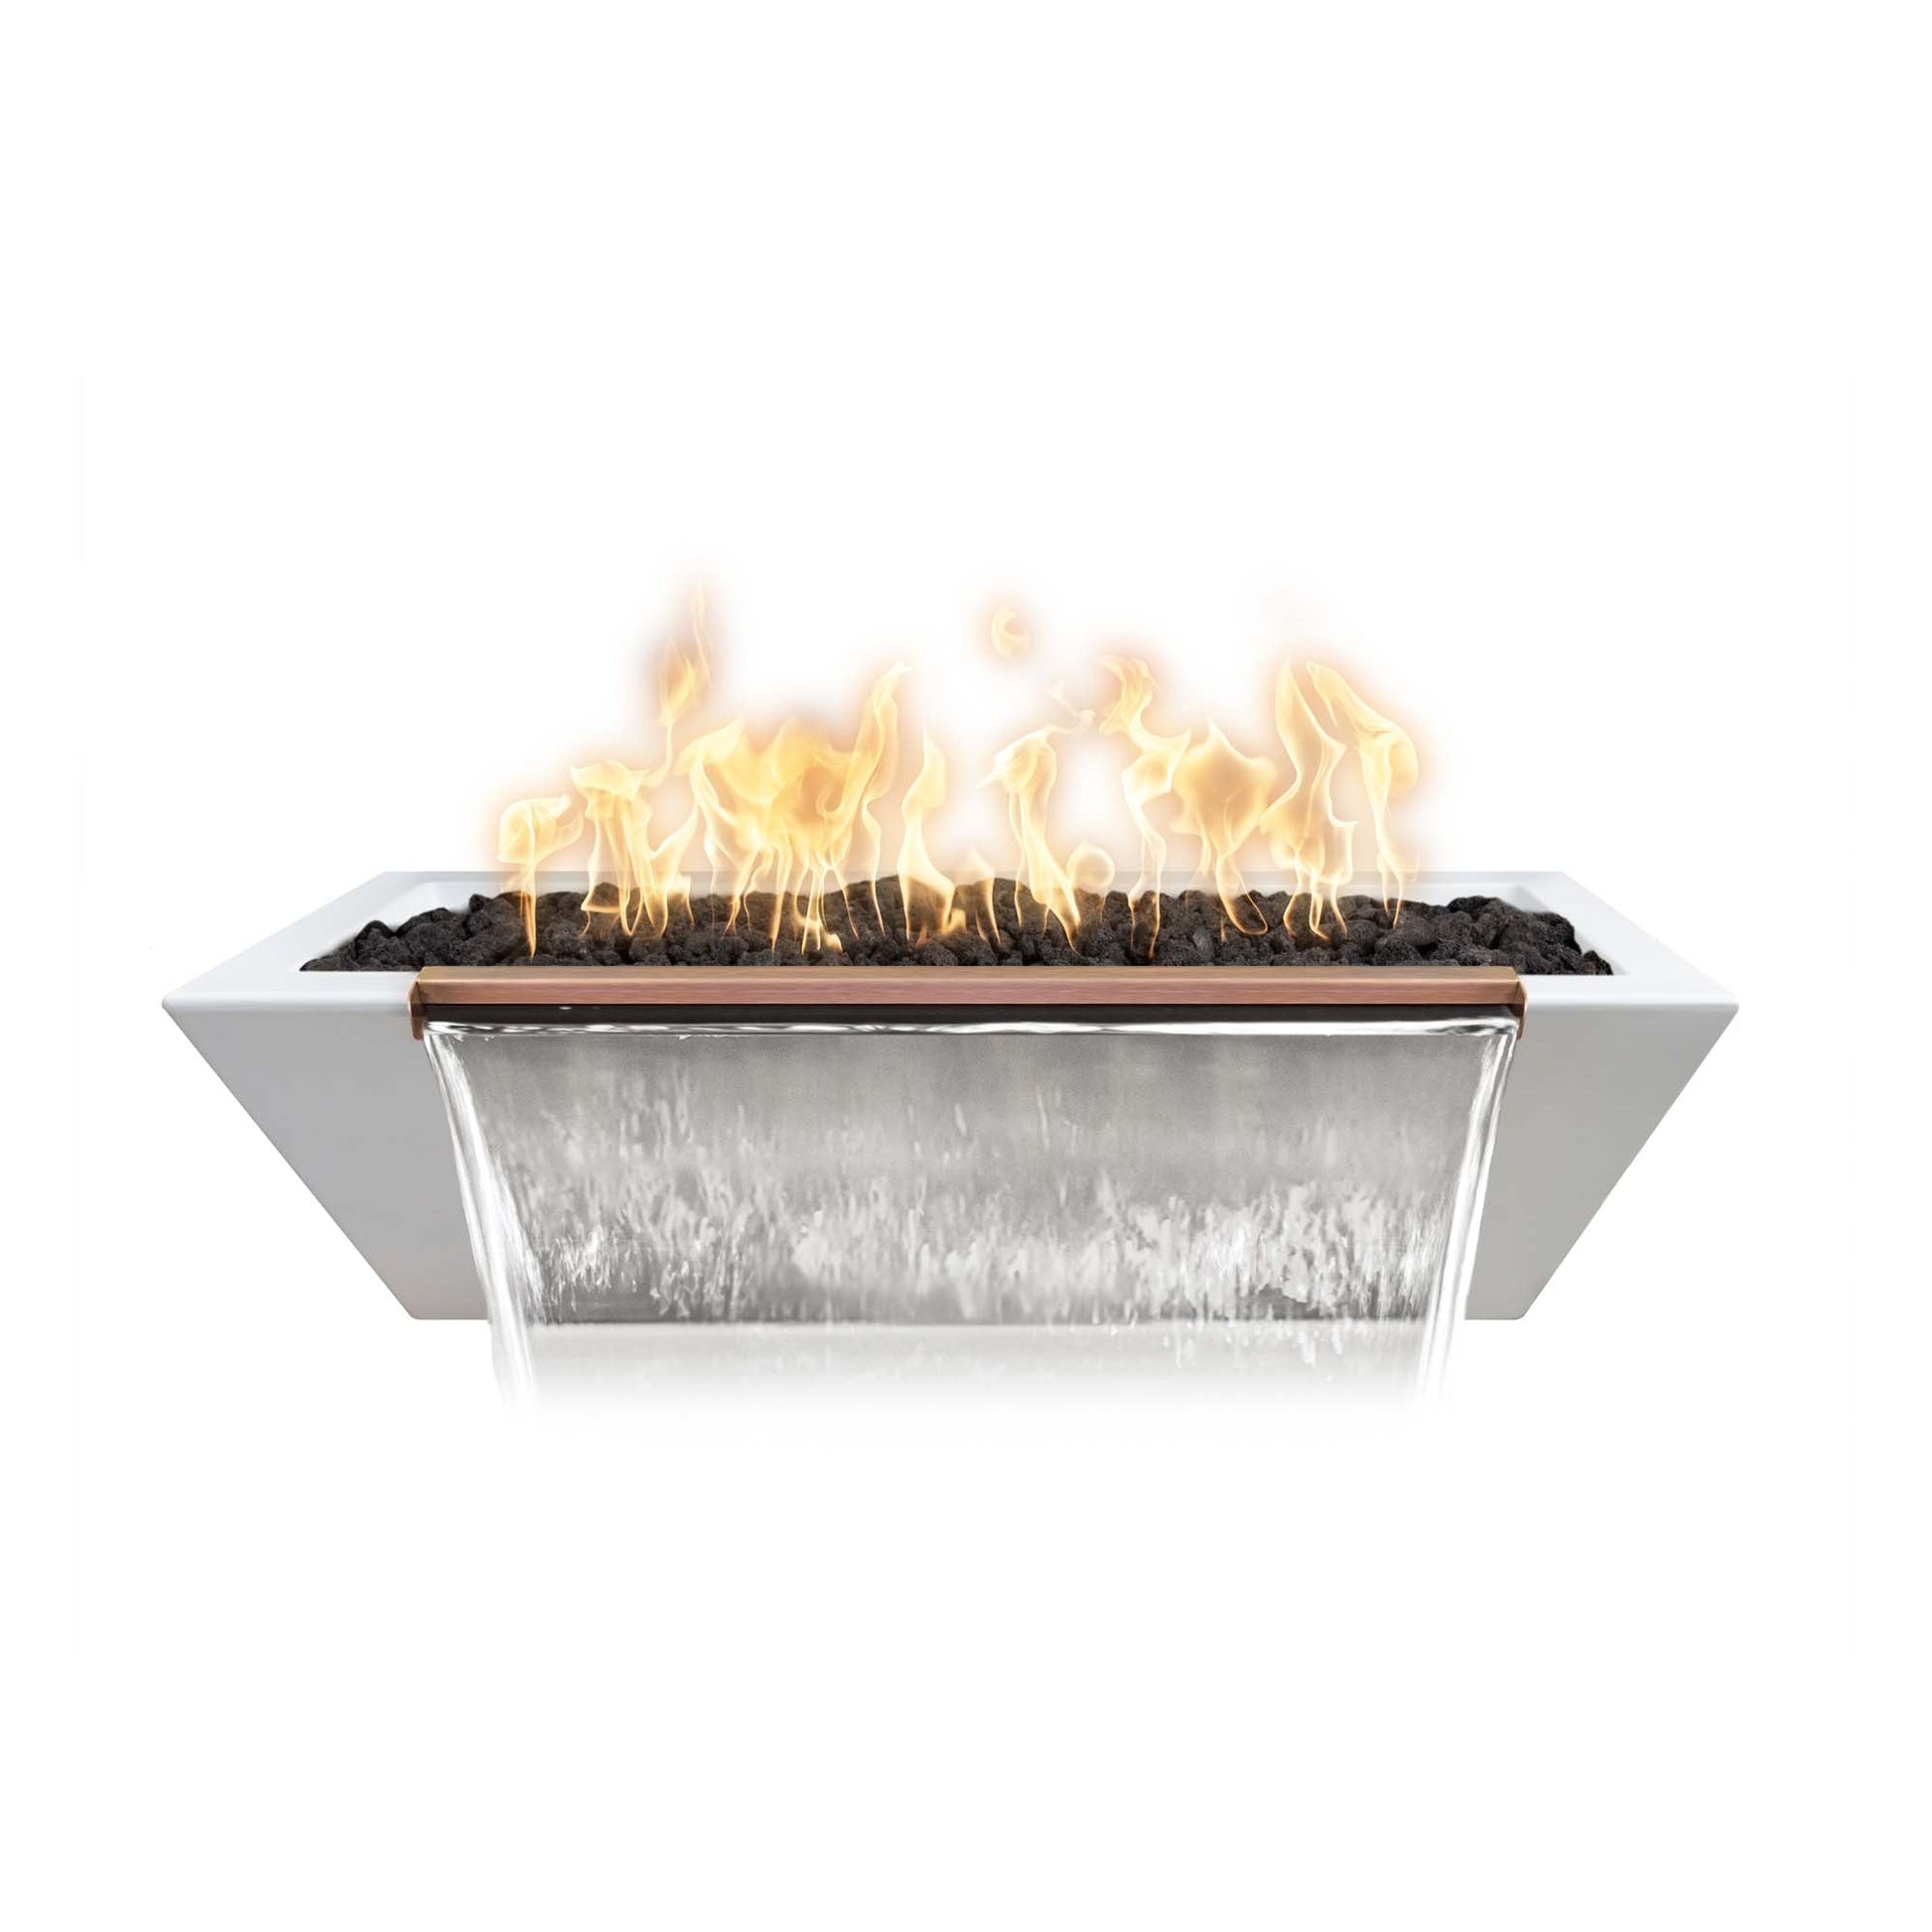 The Outdoor Plus Linear Maya 60" White GFRC Concrete Natural Gas Fire & Water Bowl with 12V Electronic Ignition